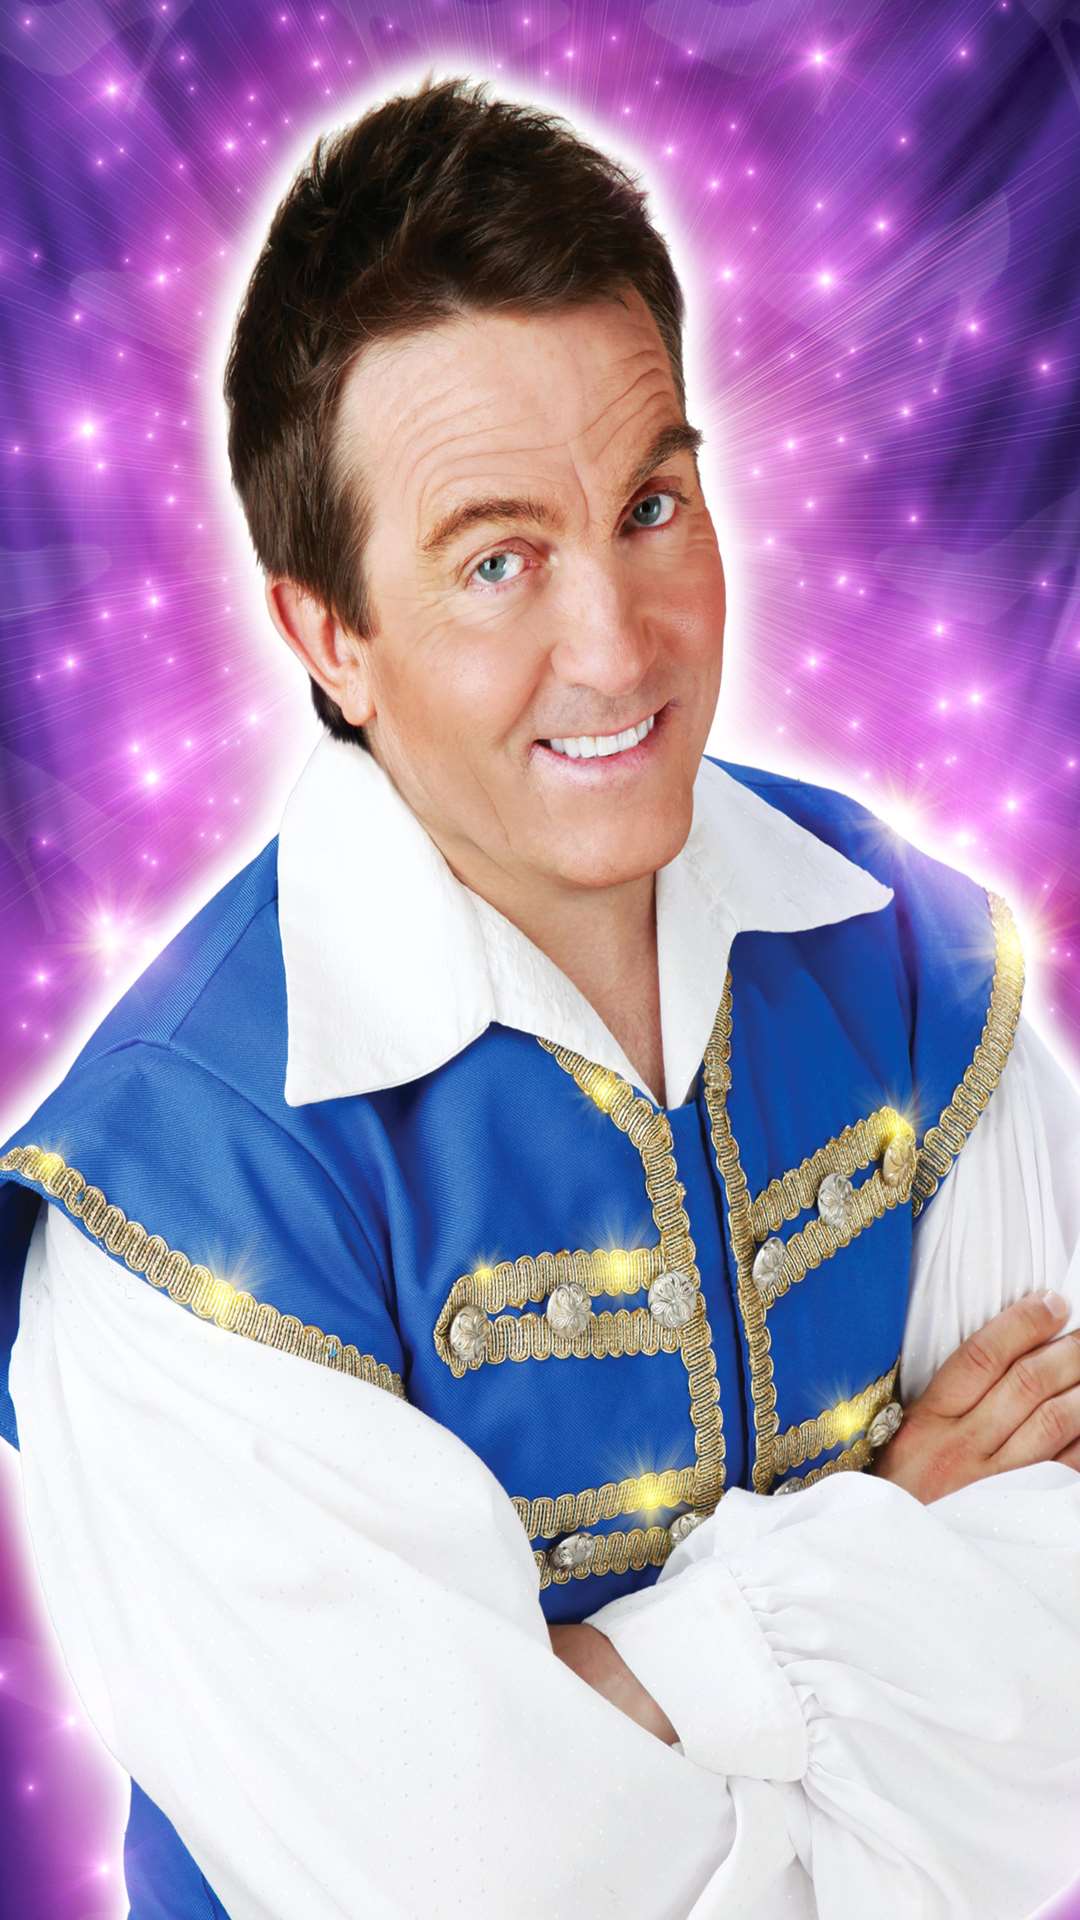 Bradley Walsh, who is to star in panto Cinderella at Dartford's Orchard Theatre this Christmas